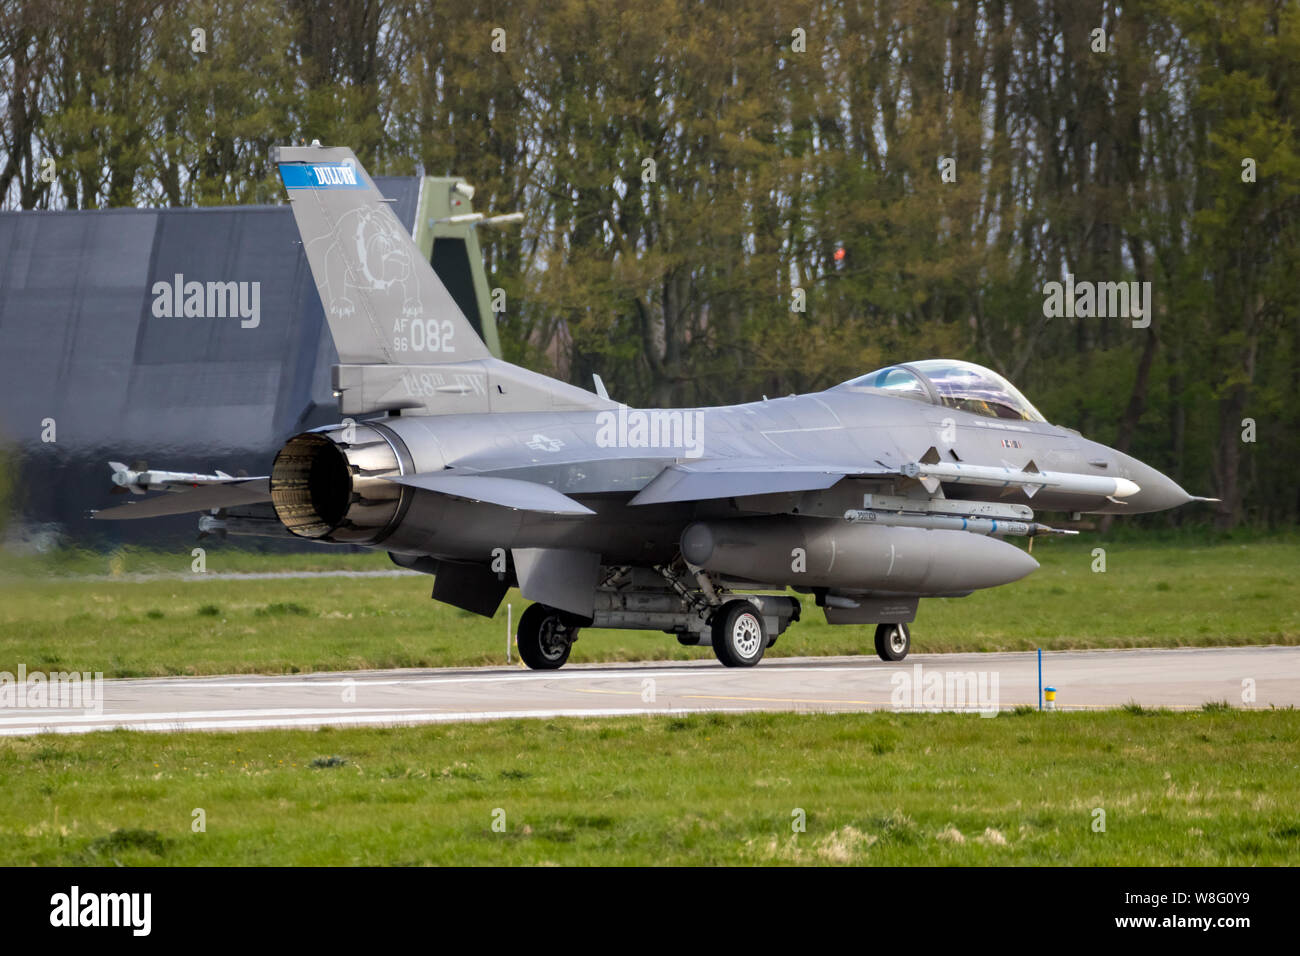 LEEUWARDEN, THE NETHERLANDS - APR 11, 2019: US Air Force F-16C fighter jet plane from 148th FW Minnesota Air National Guard taking off from Leeuwarden Stock Photo